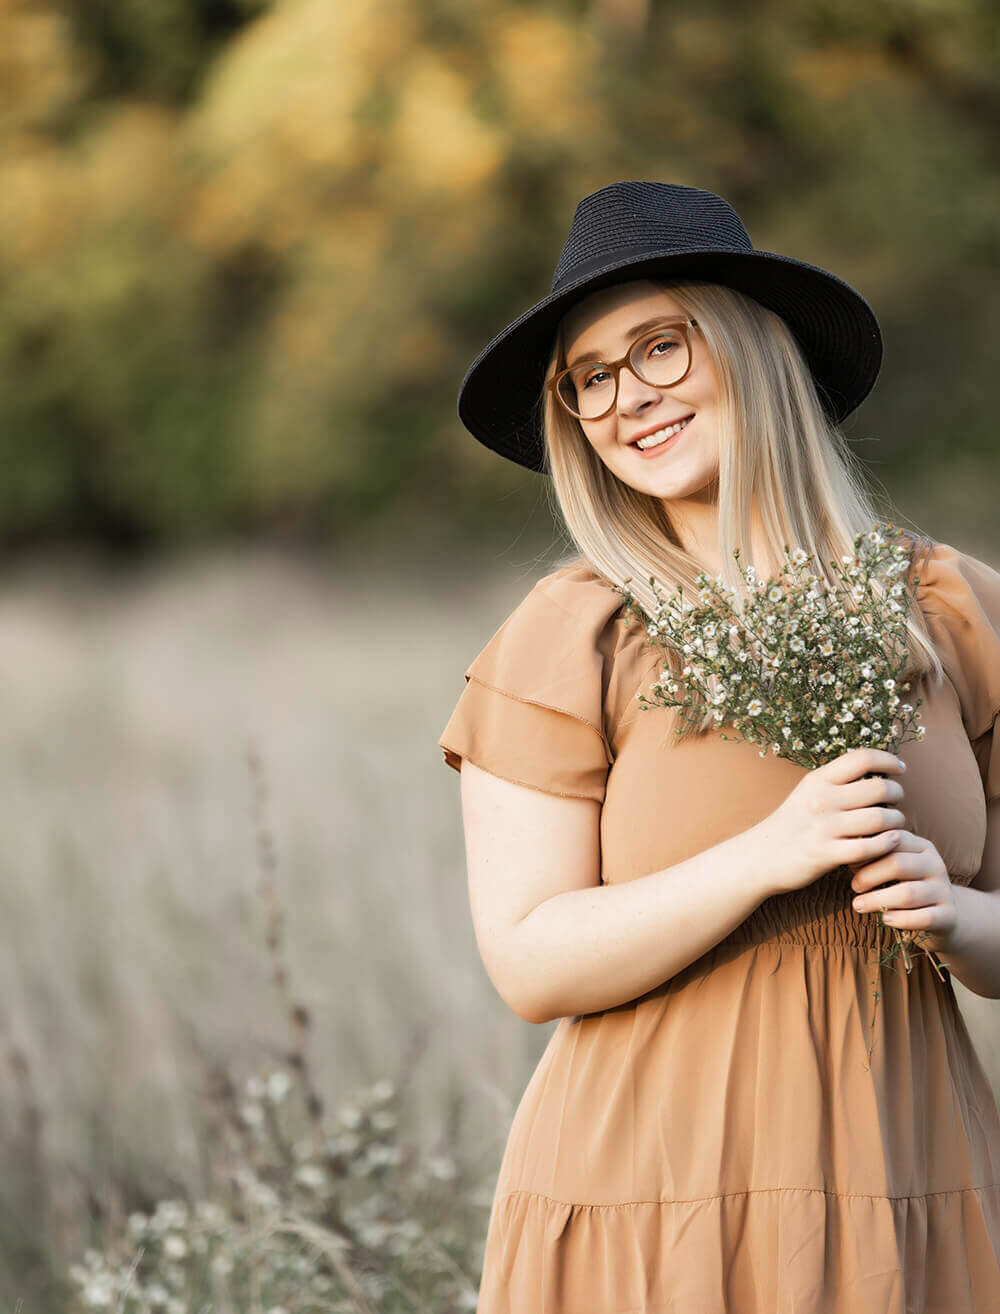 Erie Pa senior with a hat holding flowers in a field in Erie pa